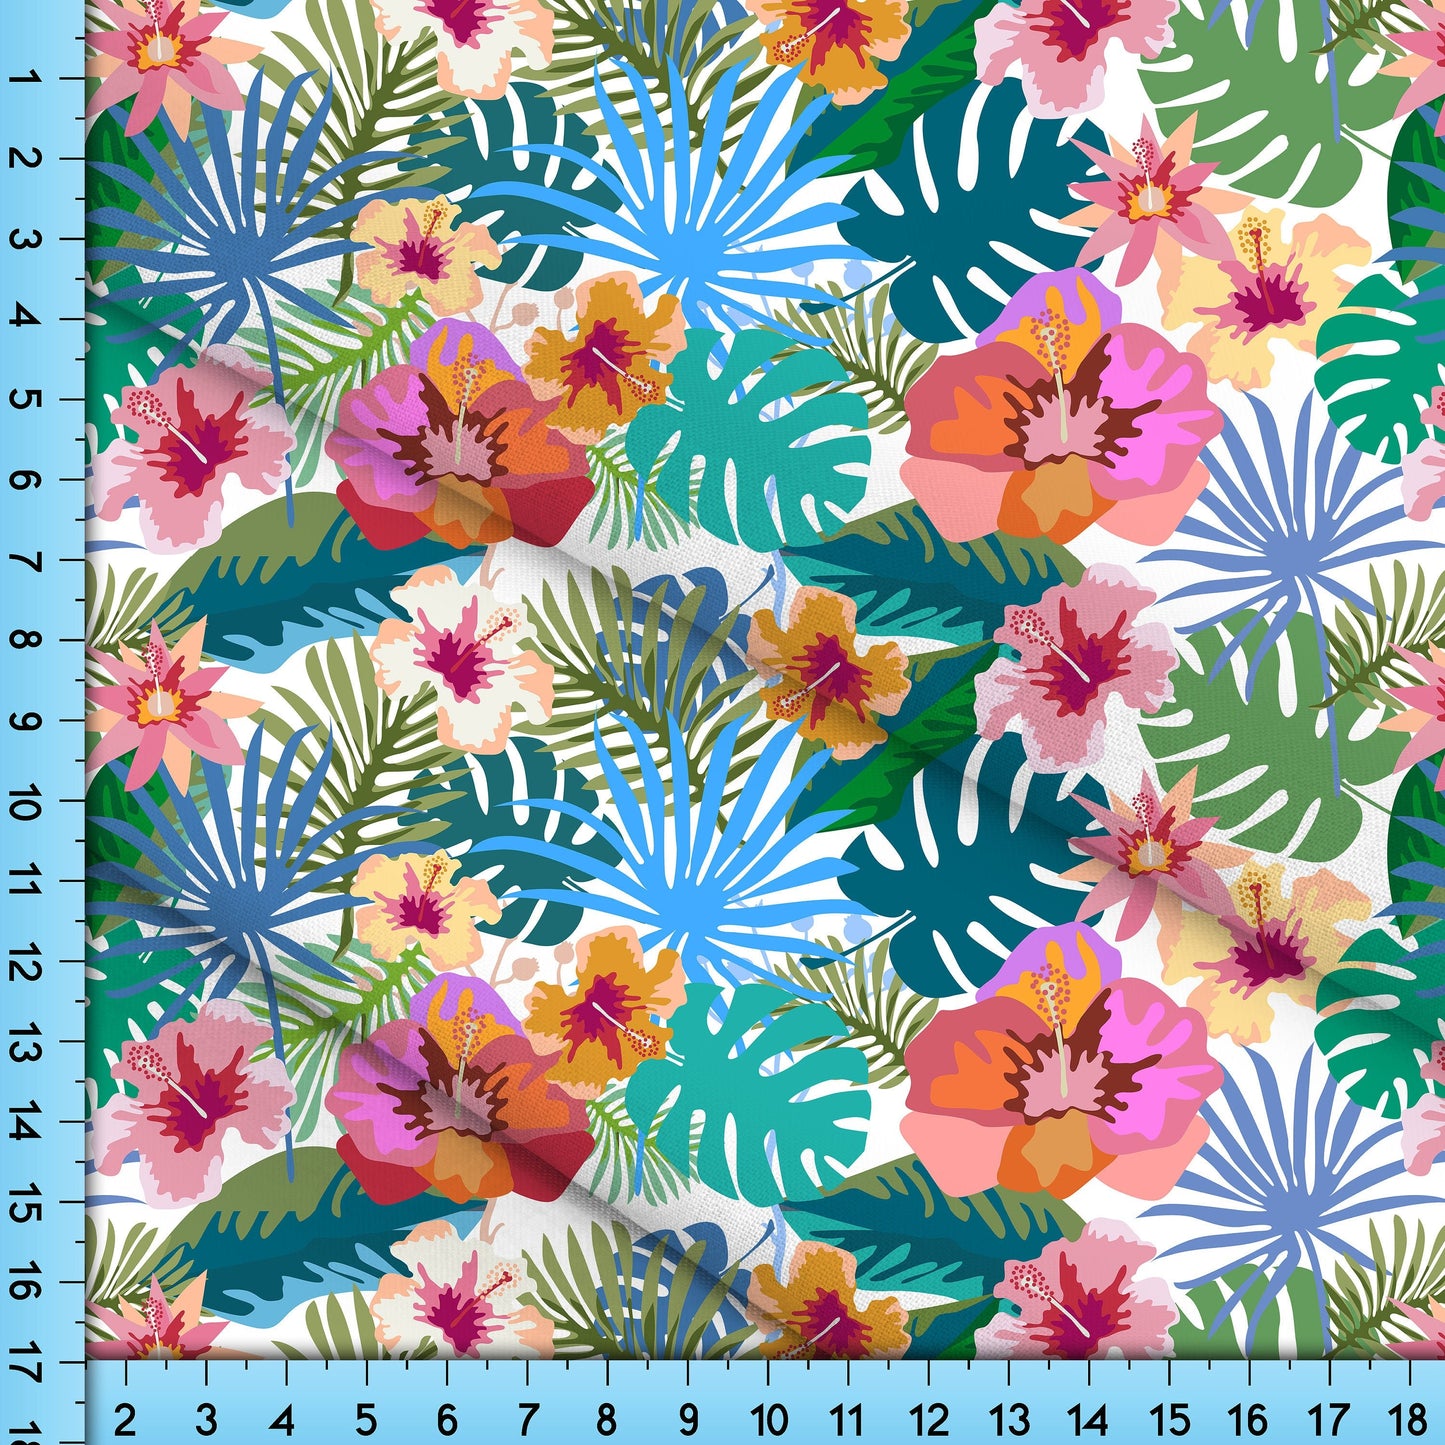 Colorful Tropical Flowers Fabric By The Yard in Blue, Pink and Green Printed on the fabric of your choice